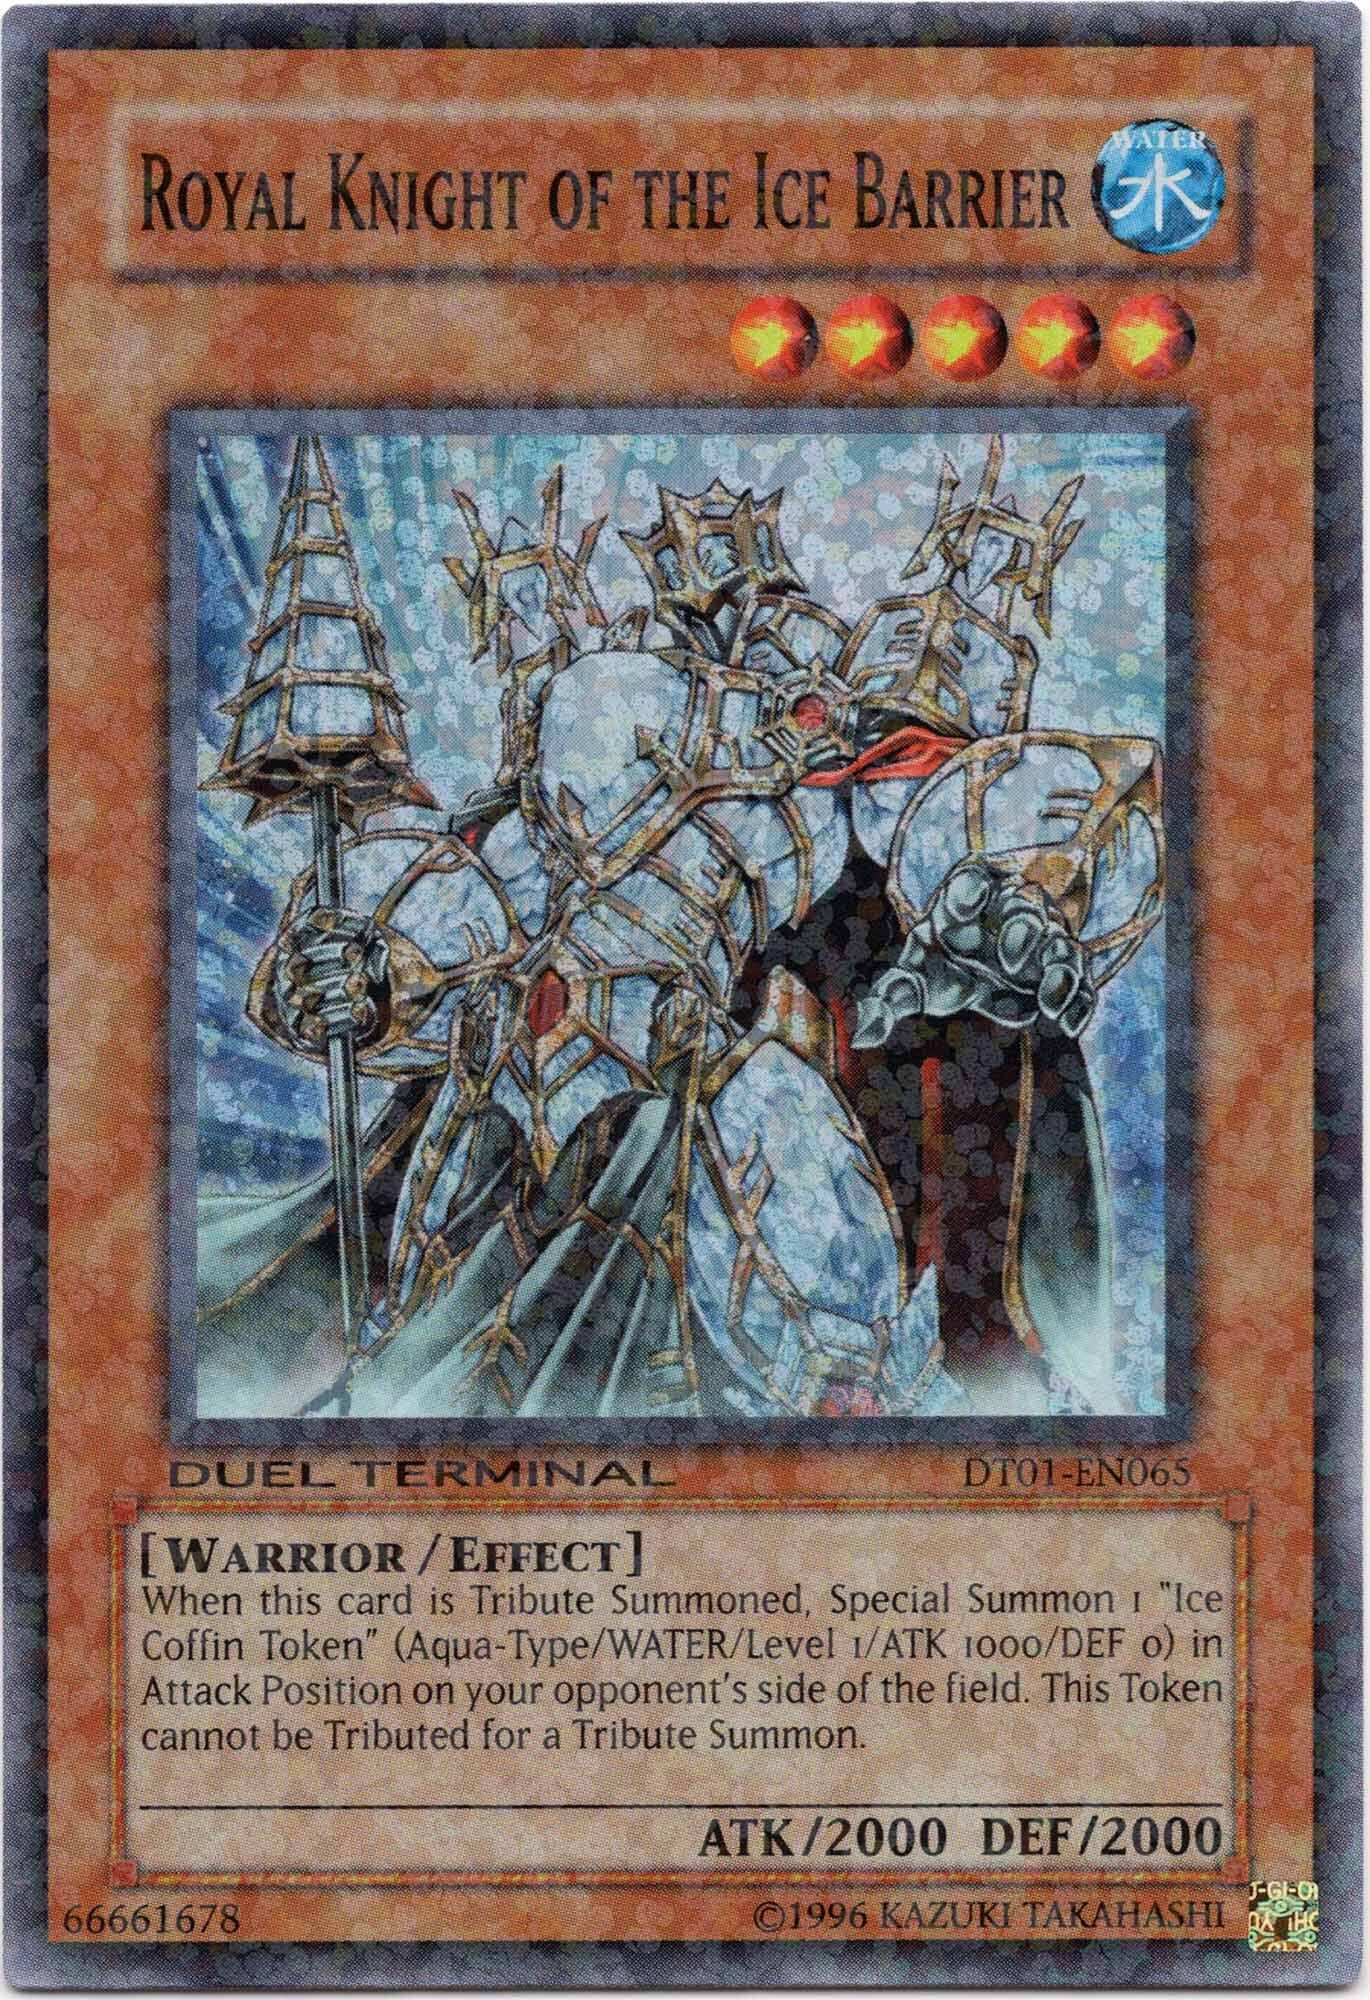 Royal Knight of the Ice Barrier - DT01-EN065 - Duel Terminal Super Parallel Rare - Duel Terminal (Ne